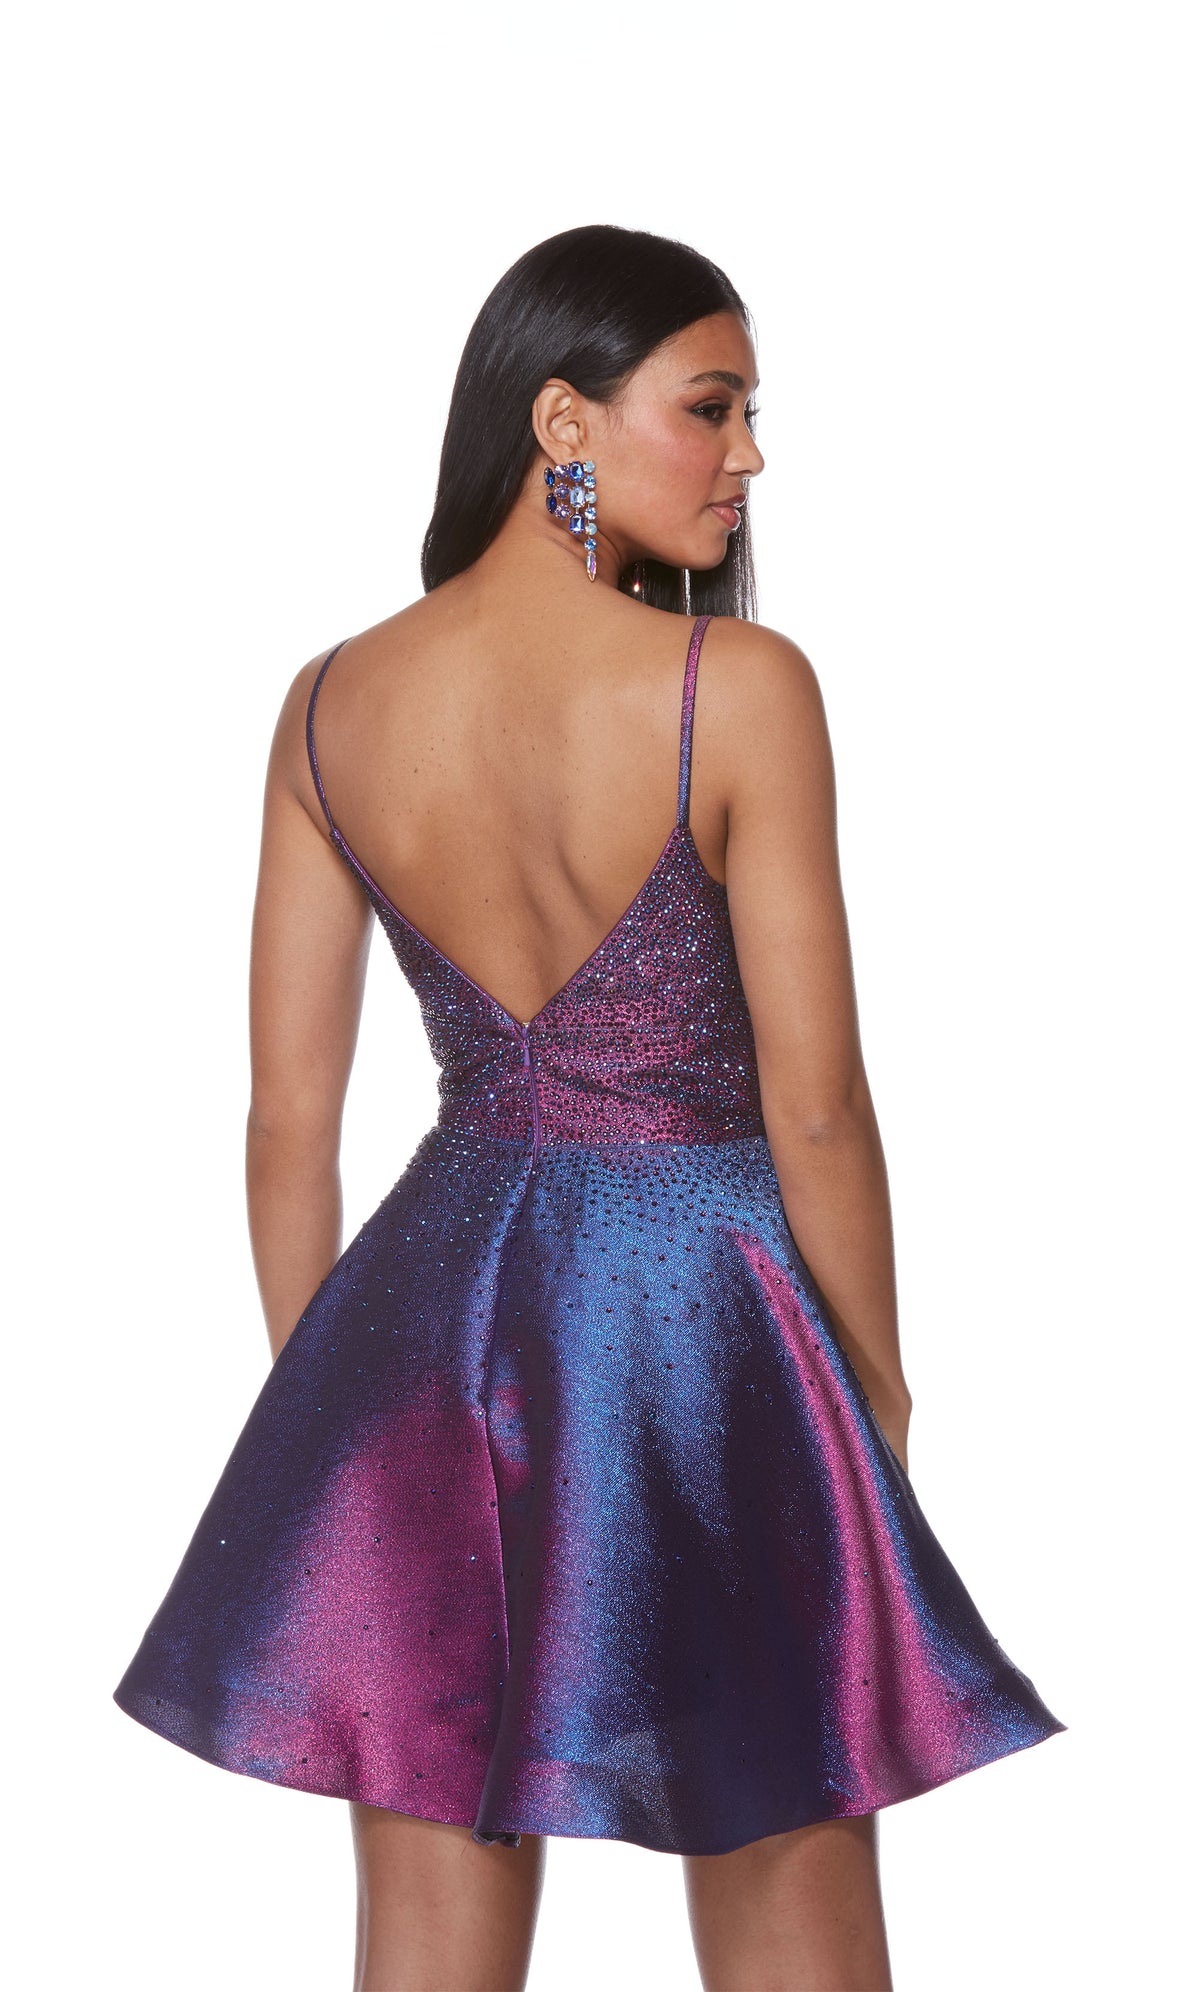 A sparkly metallic short homecoming dress boasting an open back, jewel embellished bodice, and a flirty flared skirt. The color is an iridescent blue-ish purple called blueberry.